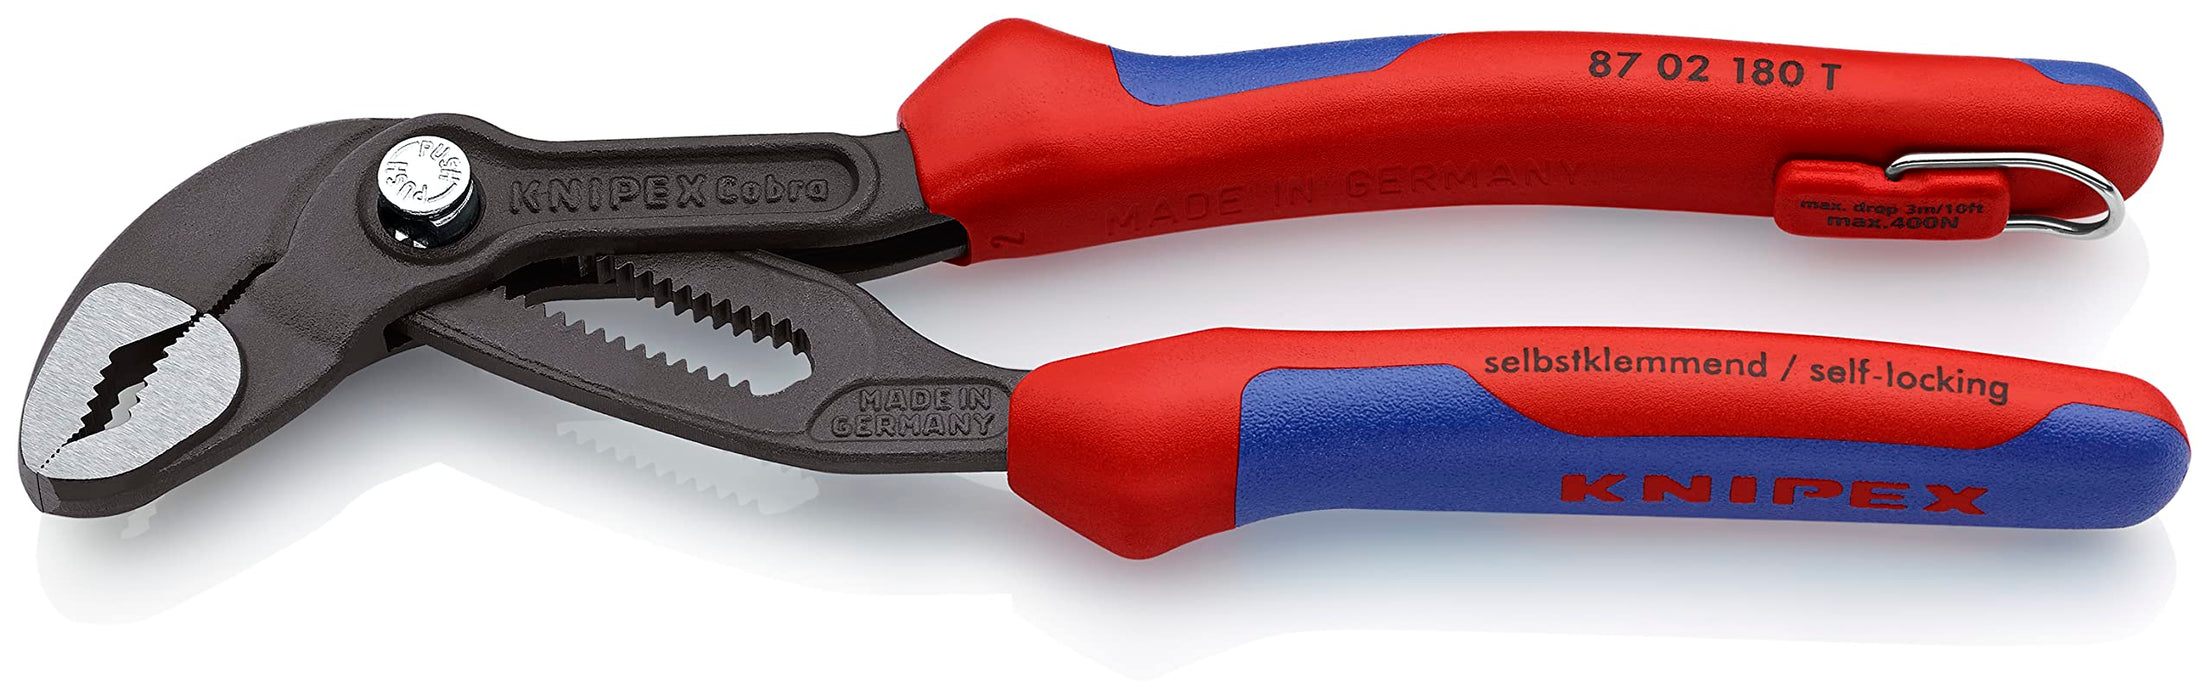 Knipex 87 02 180 T Water Pump Pliers "Cobra" 7,09" with soft handle and tether attachment point